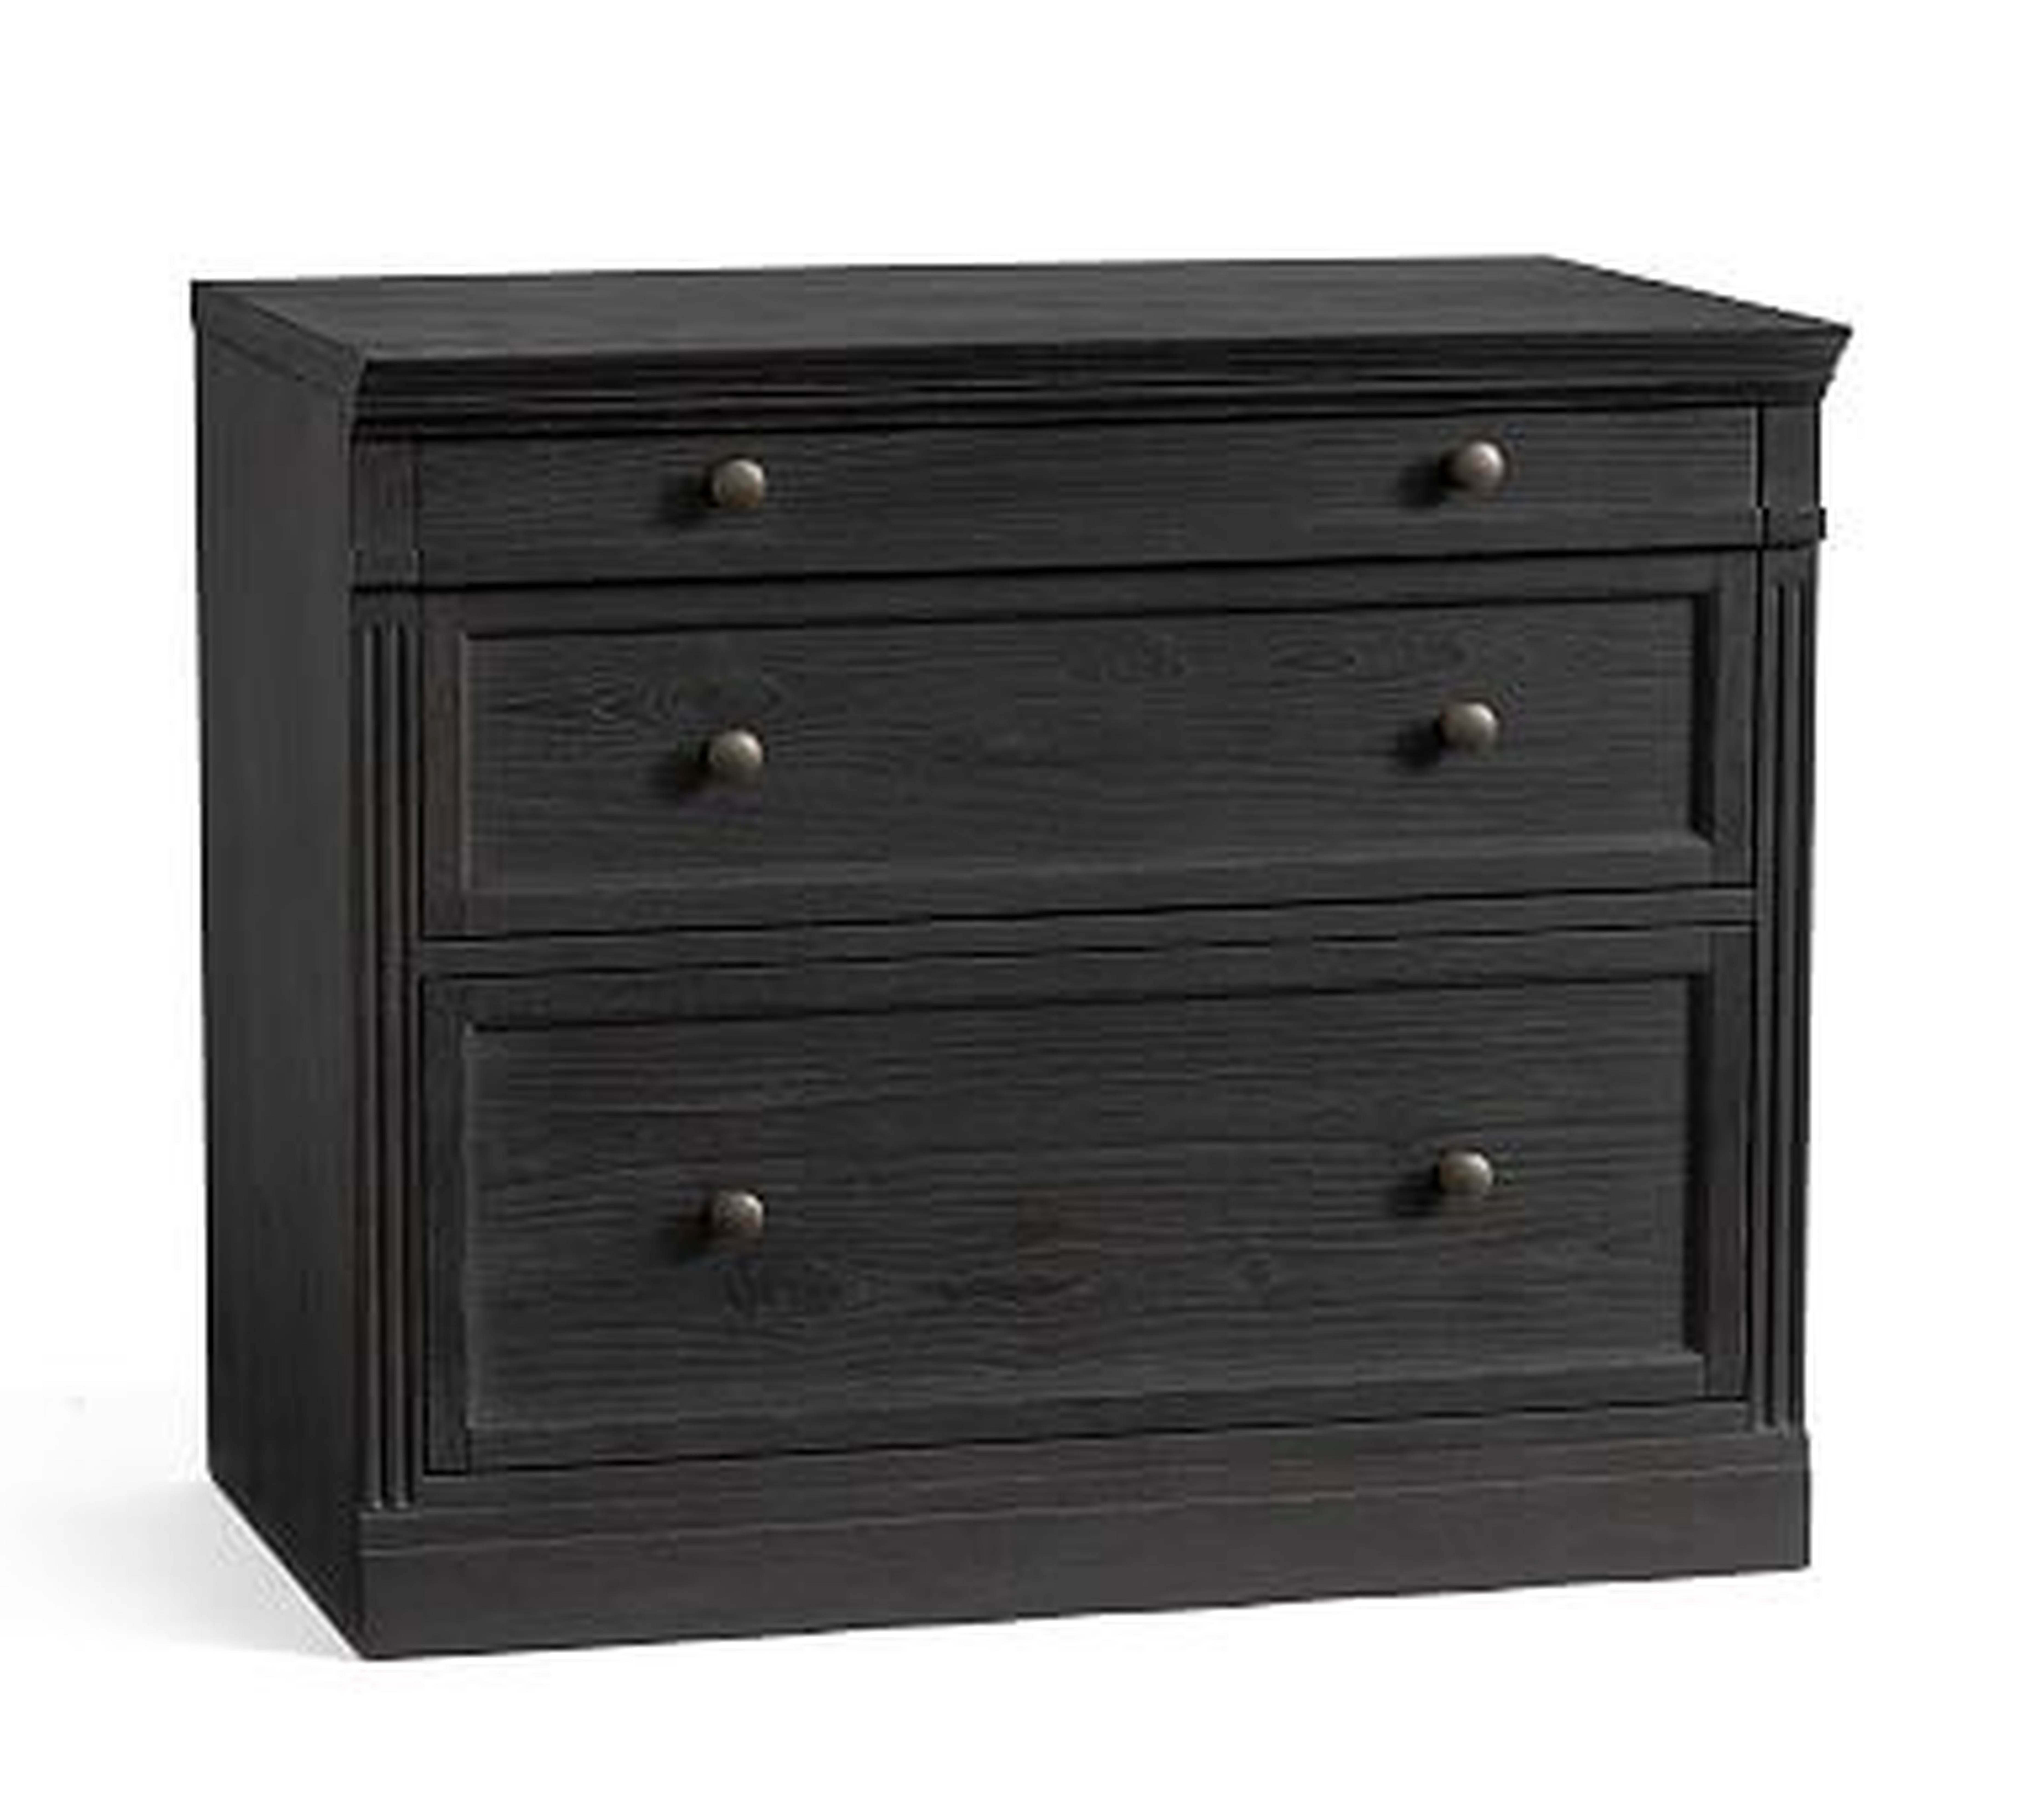 Livingston 2-Drawer Lateral File Cabinet, Dusty Charcoal - Pottery Barn